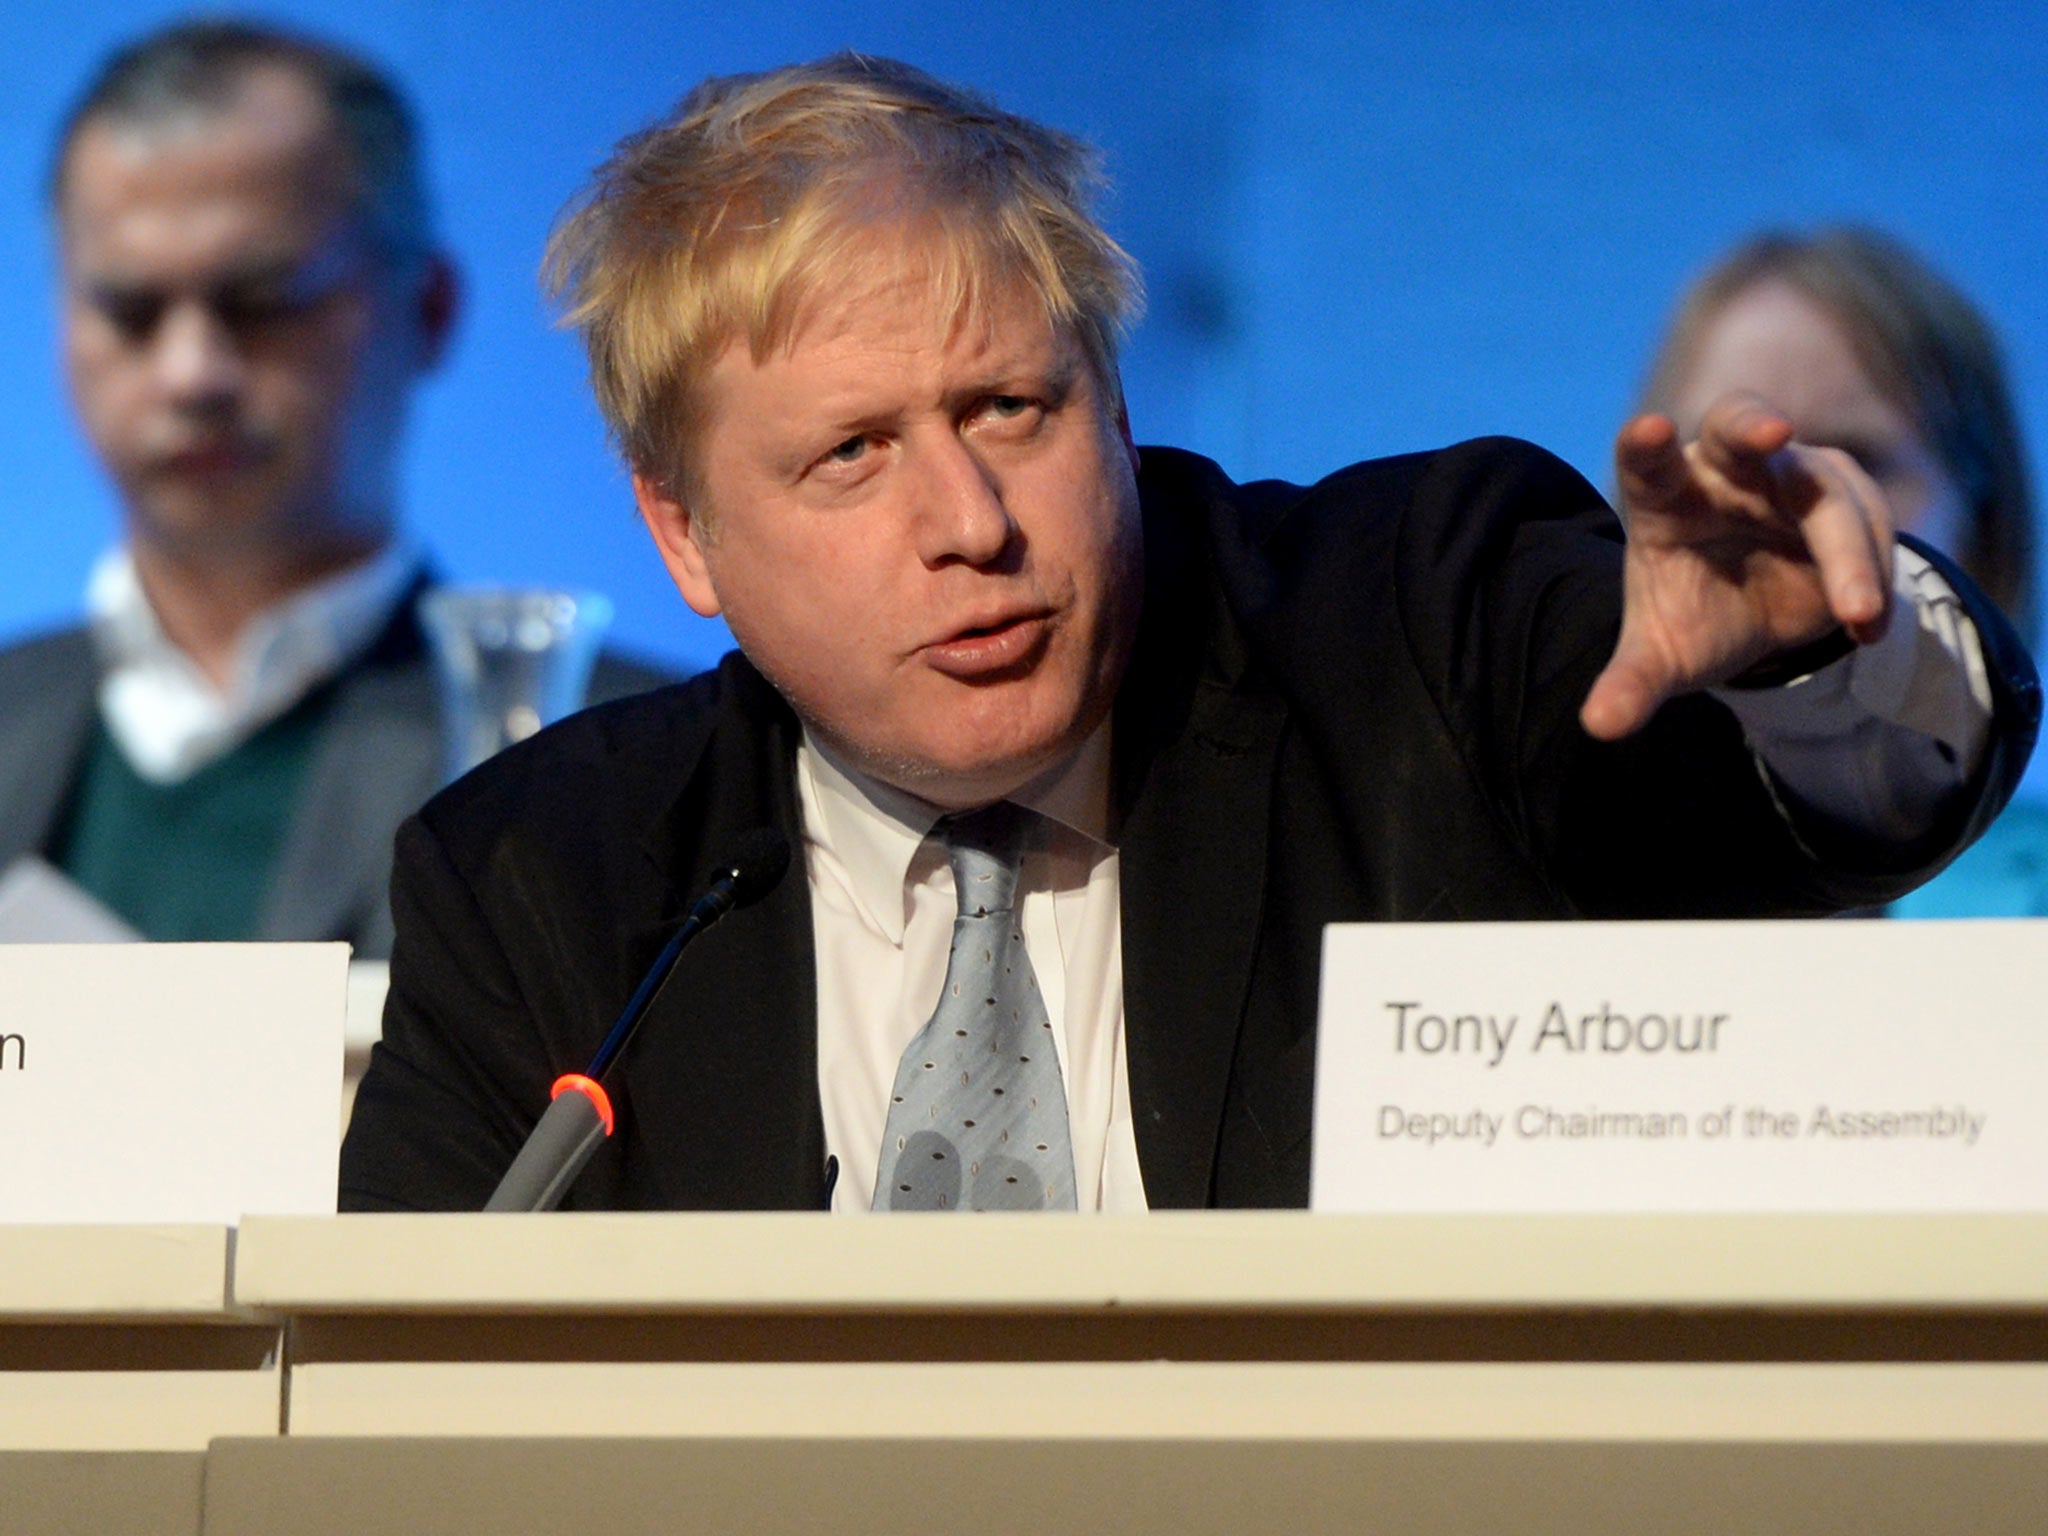 About half of Tory MPs – including London Mayor Boris Johnson – are supporting a British exit (Getty)